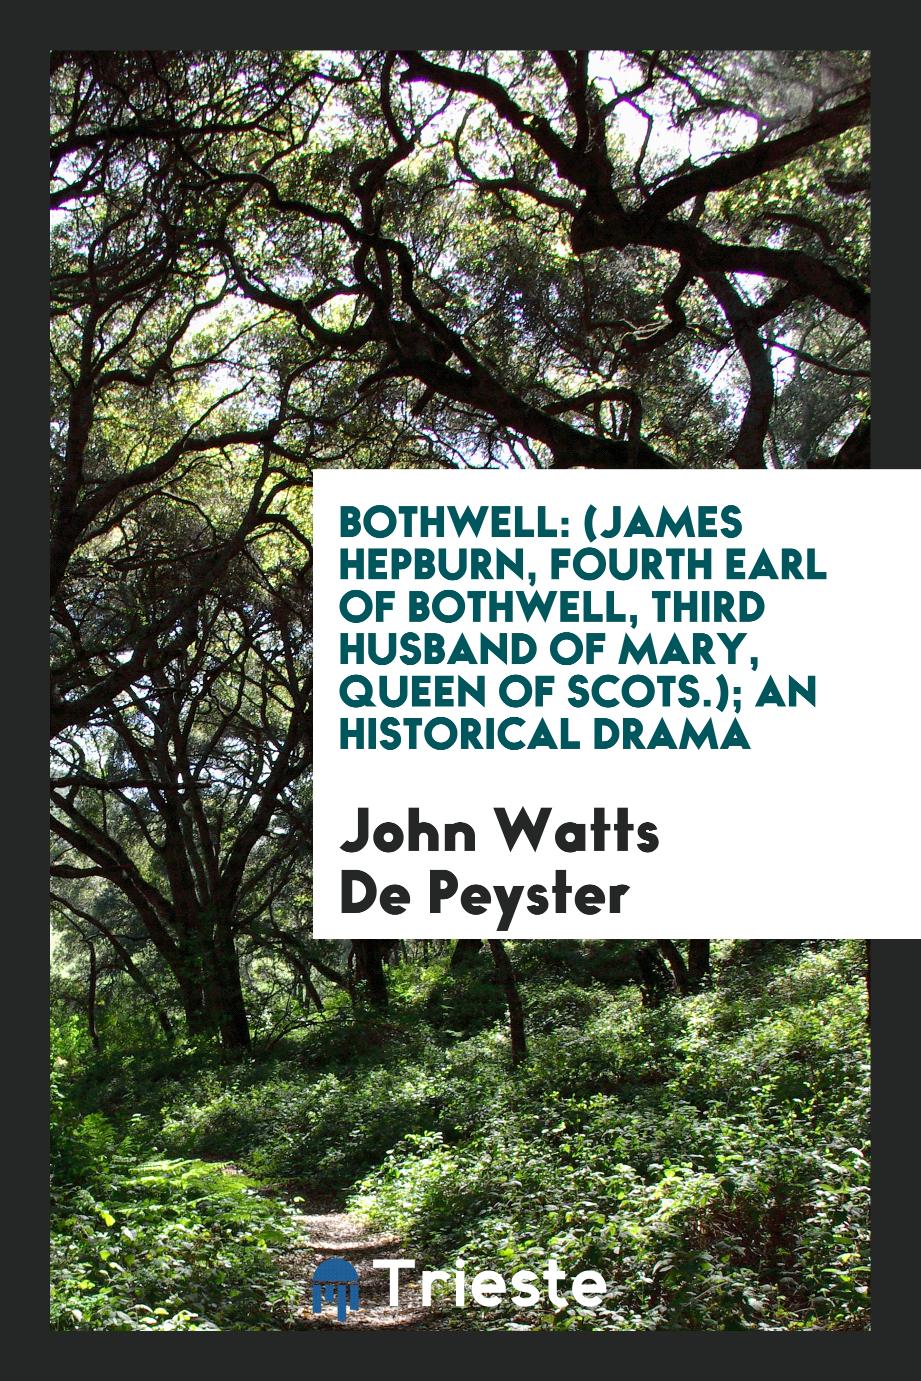 Bothwell: (James Hepburn, Fourth Earl of Bothwell, Third Husband of Mary, Queen of Scots.); An Historical Drama